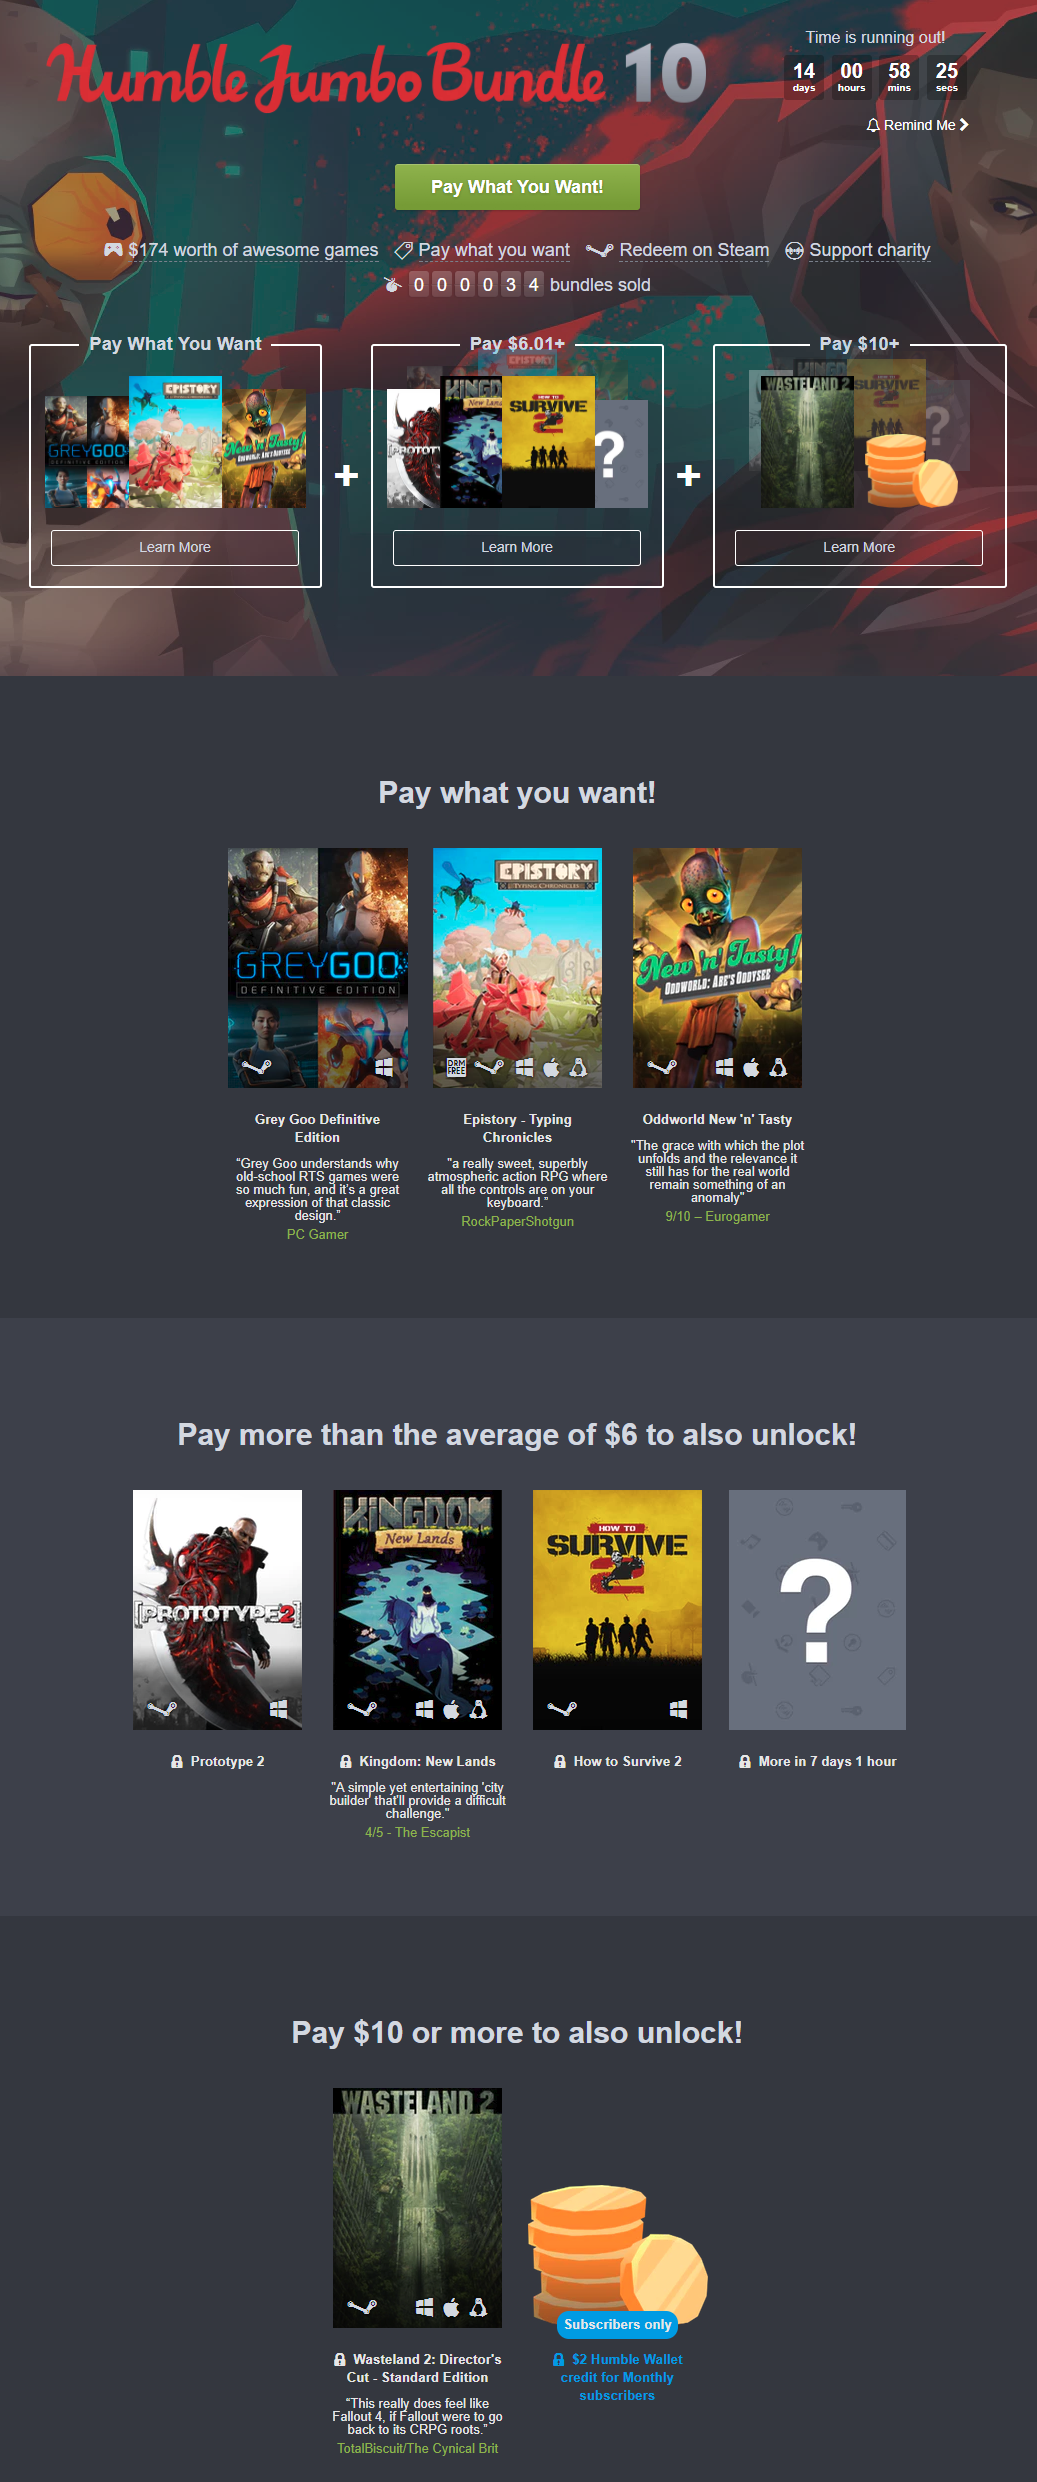 Humble Jumbo Bundle 10  pay what you want and help charity .png